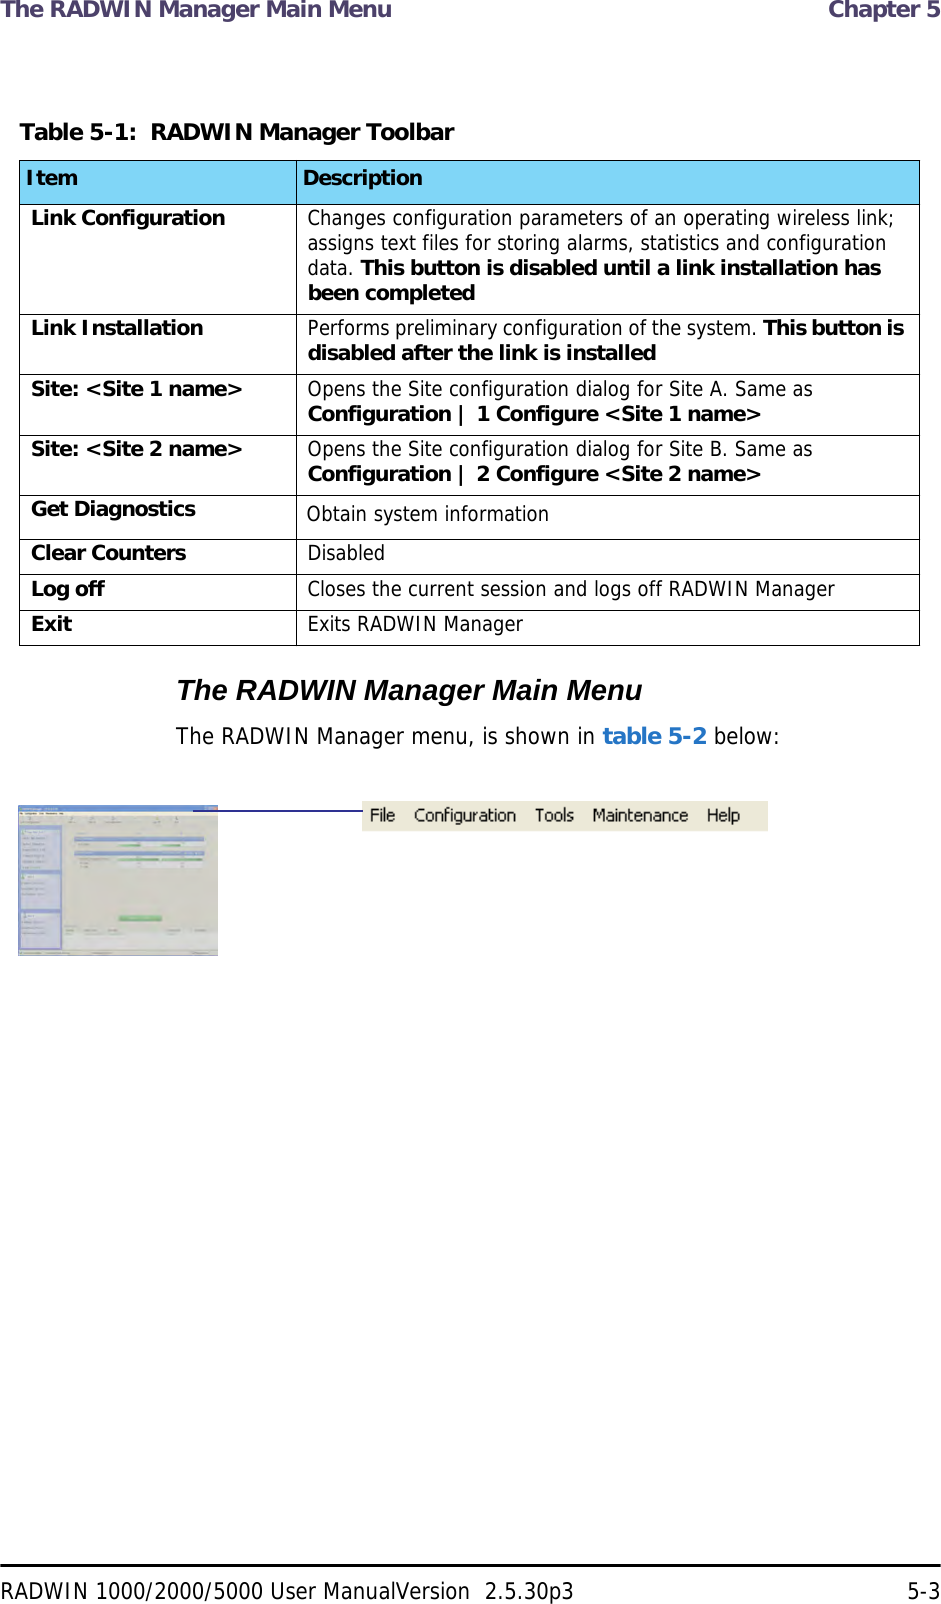 The RADWIN Manager Main Menu  Chapter 5RADWIN 1000/2000/5000 User ManualVersion  2.5.30p3 5-3The RADWIN Manager Main MenuThe RADWIN Manager menu, is shown in table 5-2 below:Table 5-1:  RADWIN Manager ToolbarItem DescriptionLink Configuration Changes configuration parameters of an operating wireless link; assigns text files for storing alarms, statistics and configuration data. This button is disabled until a link installation has been completedLink Installation Performs preliminary configuration of the system. This button is disabled after the link is installedSite: &lt;Site 1 name&gt; Opens the Site configuration dialog for Site A. Same as Configuration | 1 Configure &lt;Site 1 name&gt;Site: &lt;Site 2 name&gt; Opens the Site configuration dialog for Site B. Same as Configuration | 2 Configure &lt;Site 2 name&gt;Get Diagnostics Obtain system informationClear Counters DisabledLog off Closes the current session and logs off RADWIN ManagerExit Exits RADWIN Manager